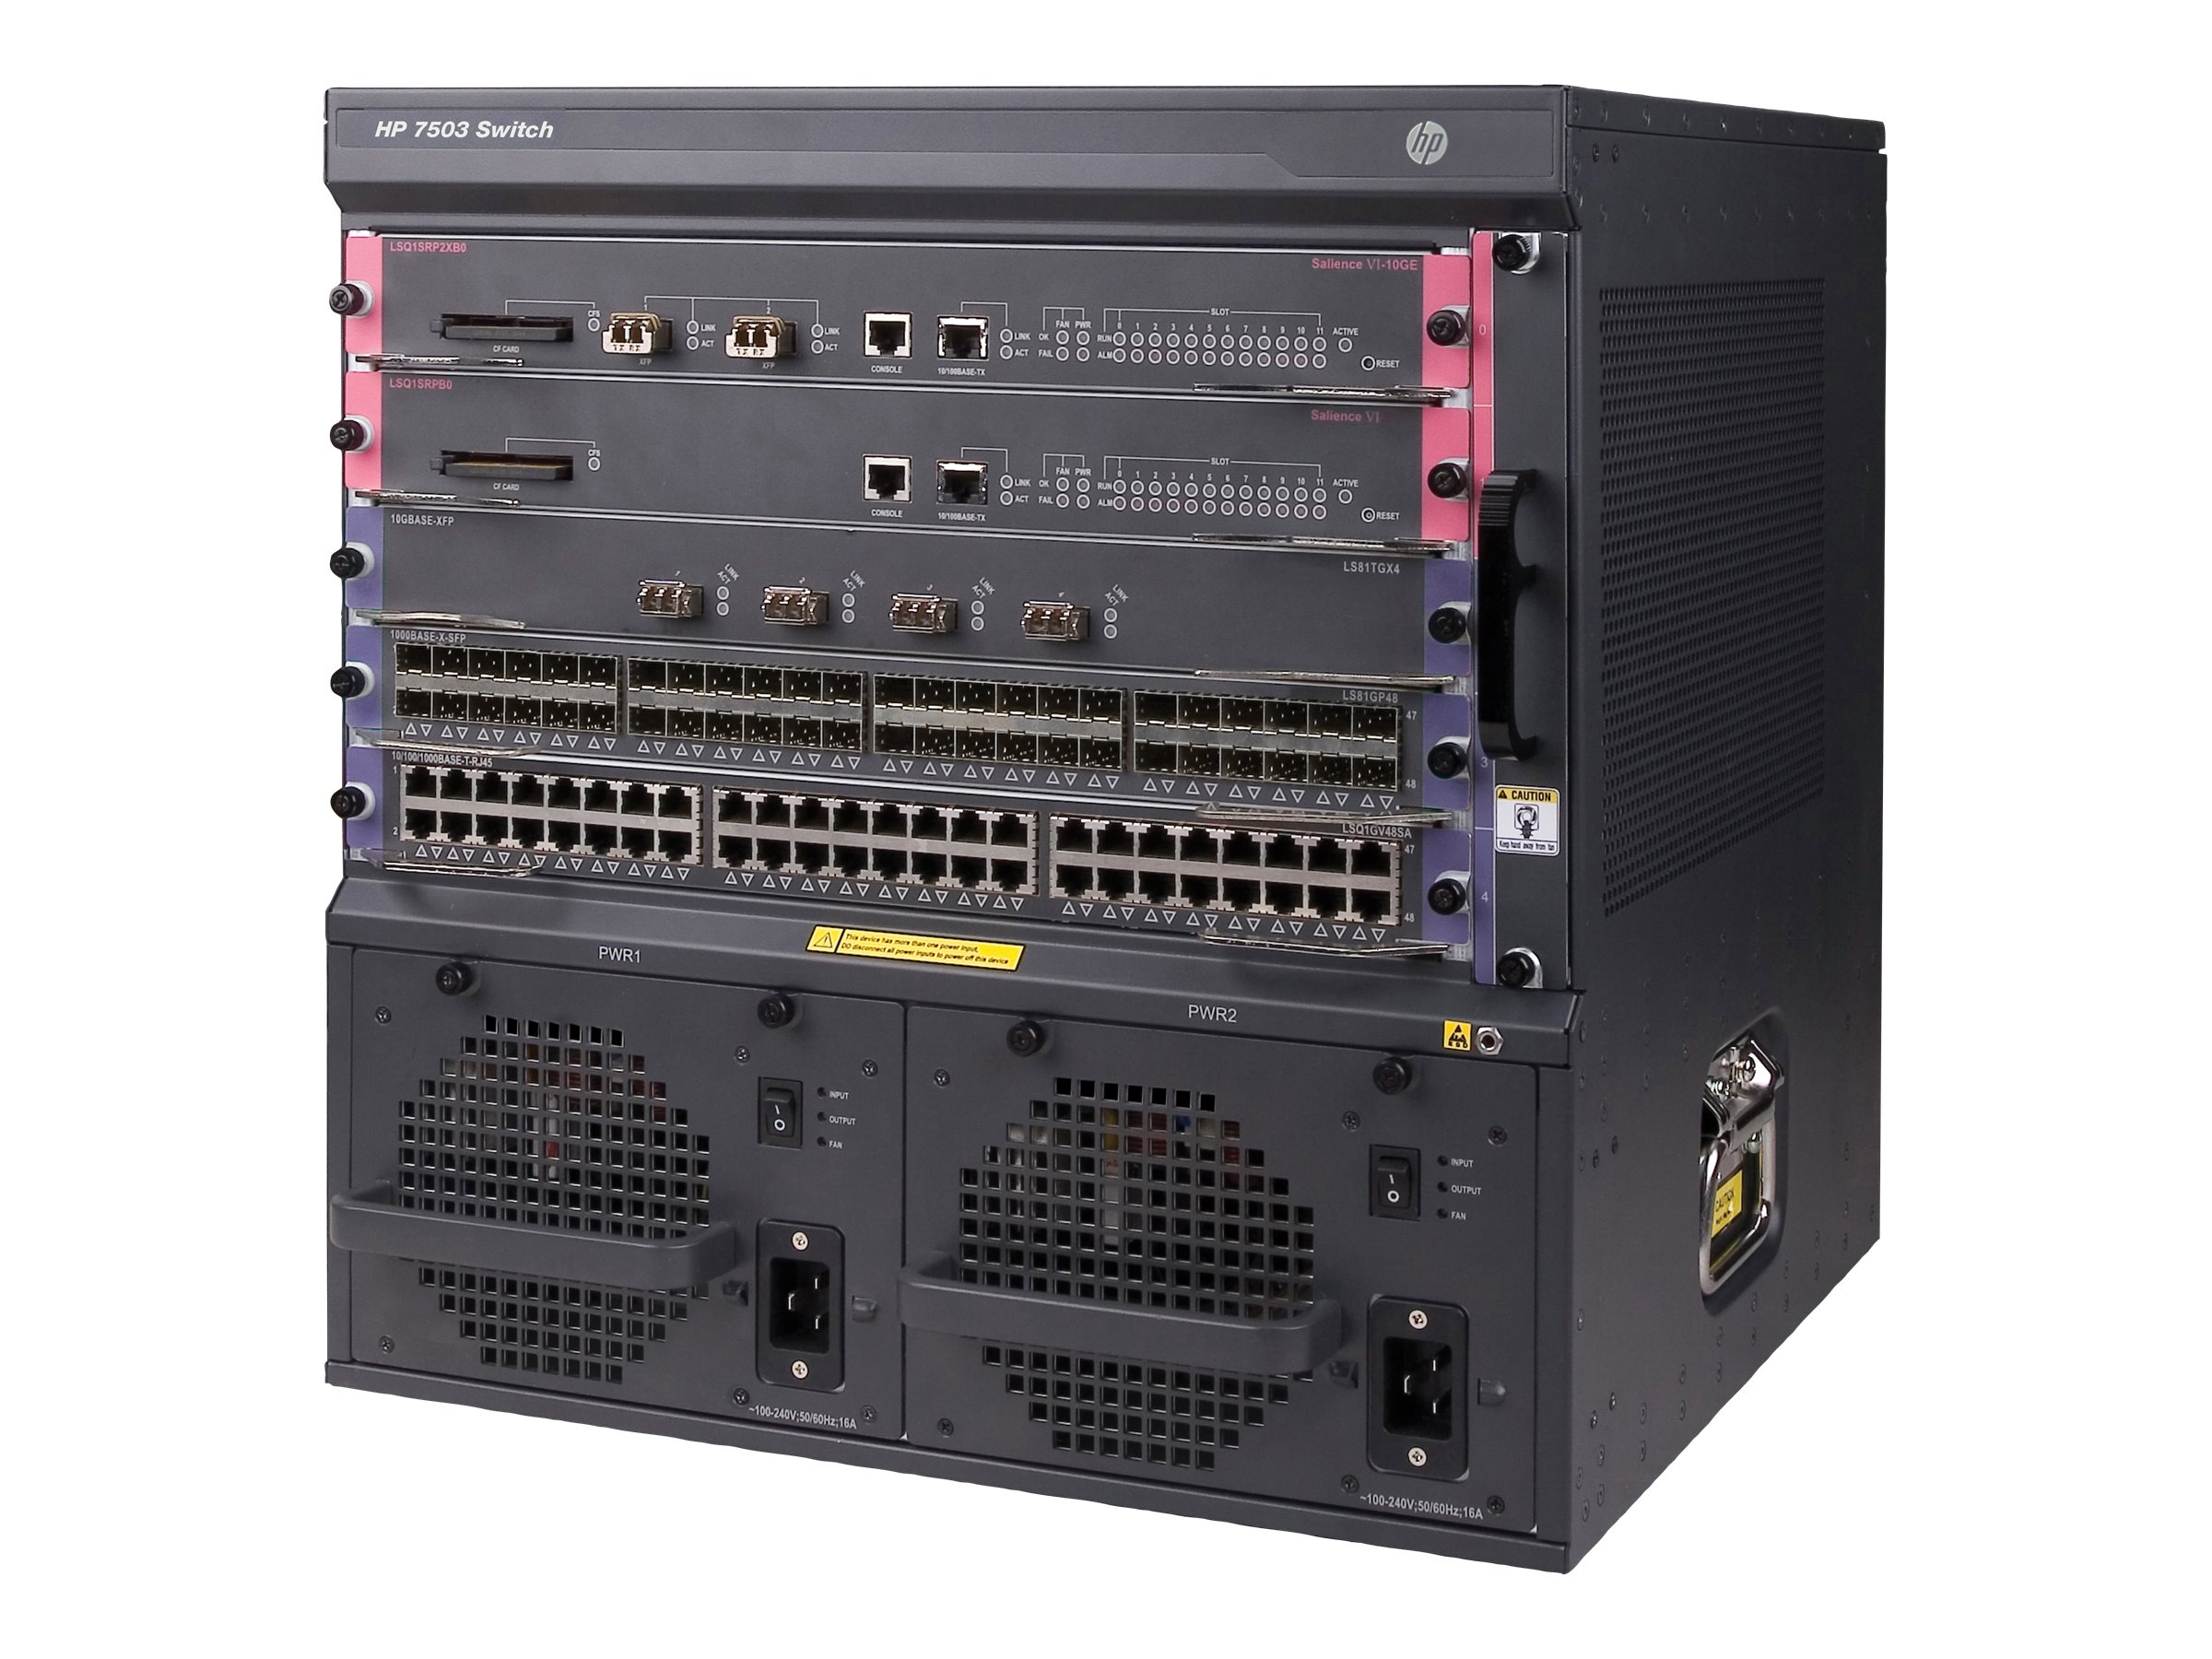 HPE FlexNetwork 7503 Chassis - Switch - L4-L7